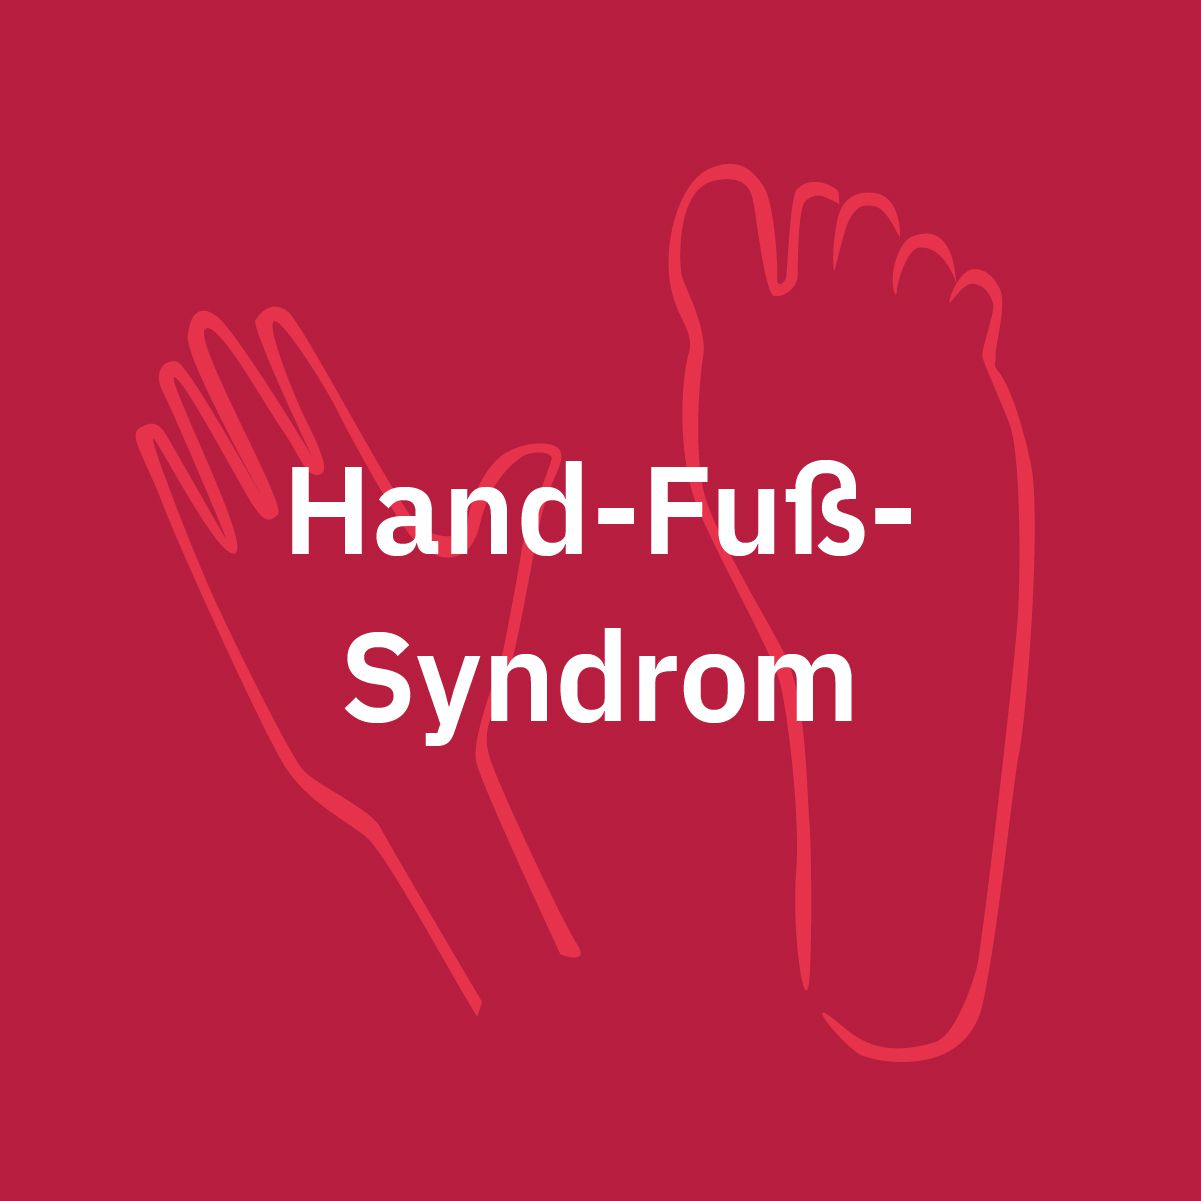 Hand - Fuss - Syndrom